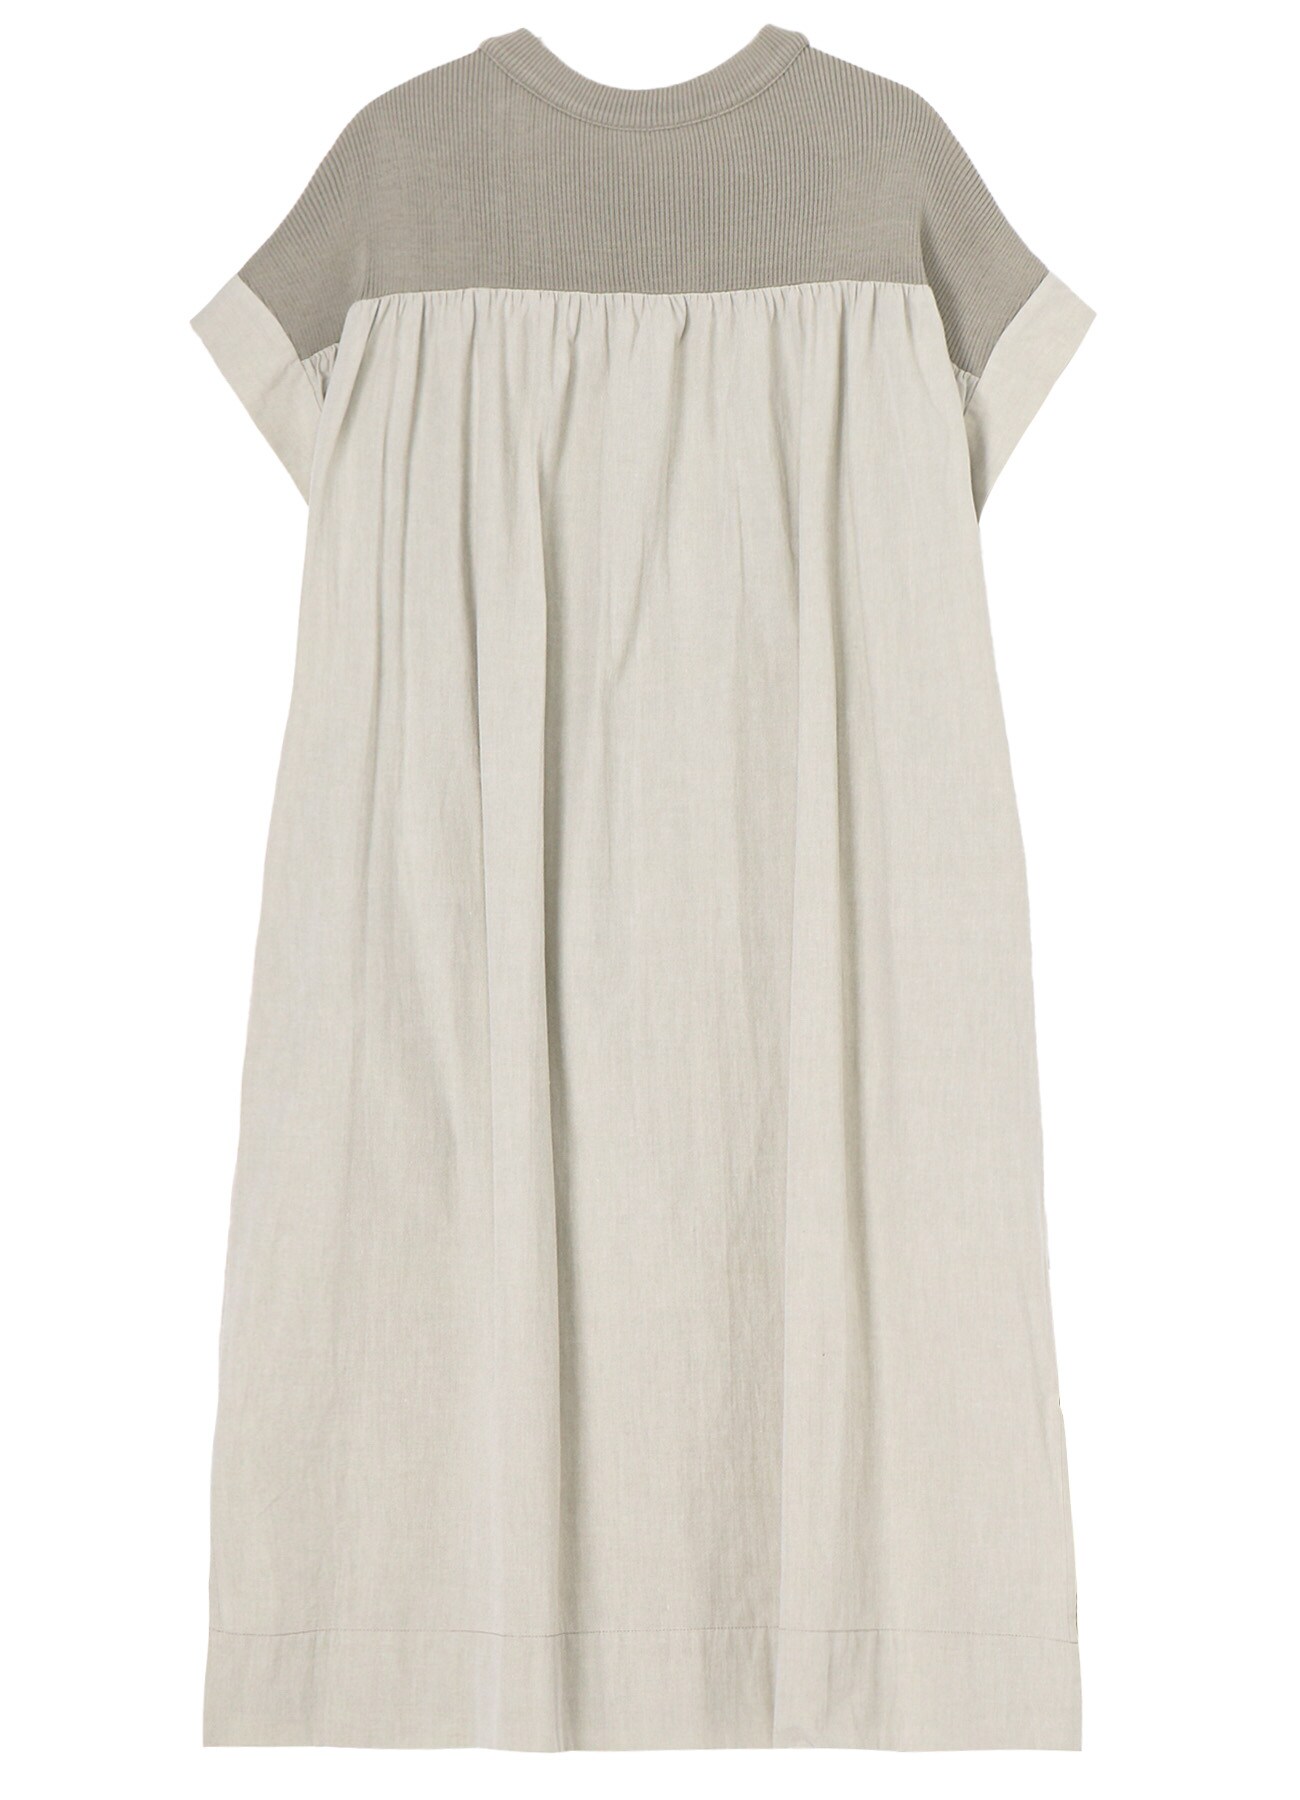 COTTON CHAMBRAY RIBBED FLY FRONT OPEN DRESS